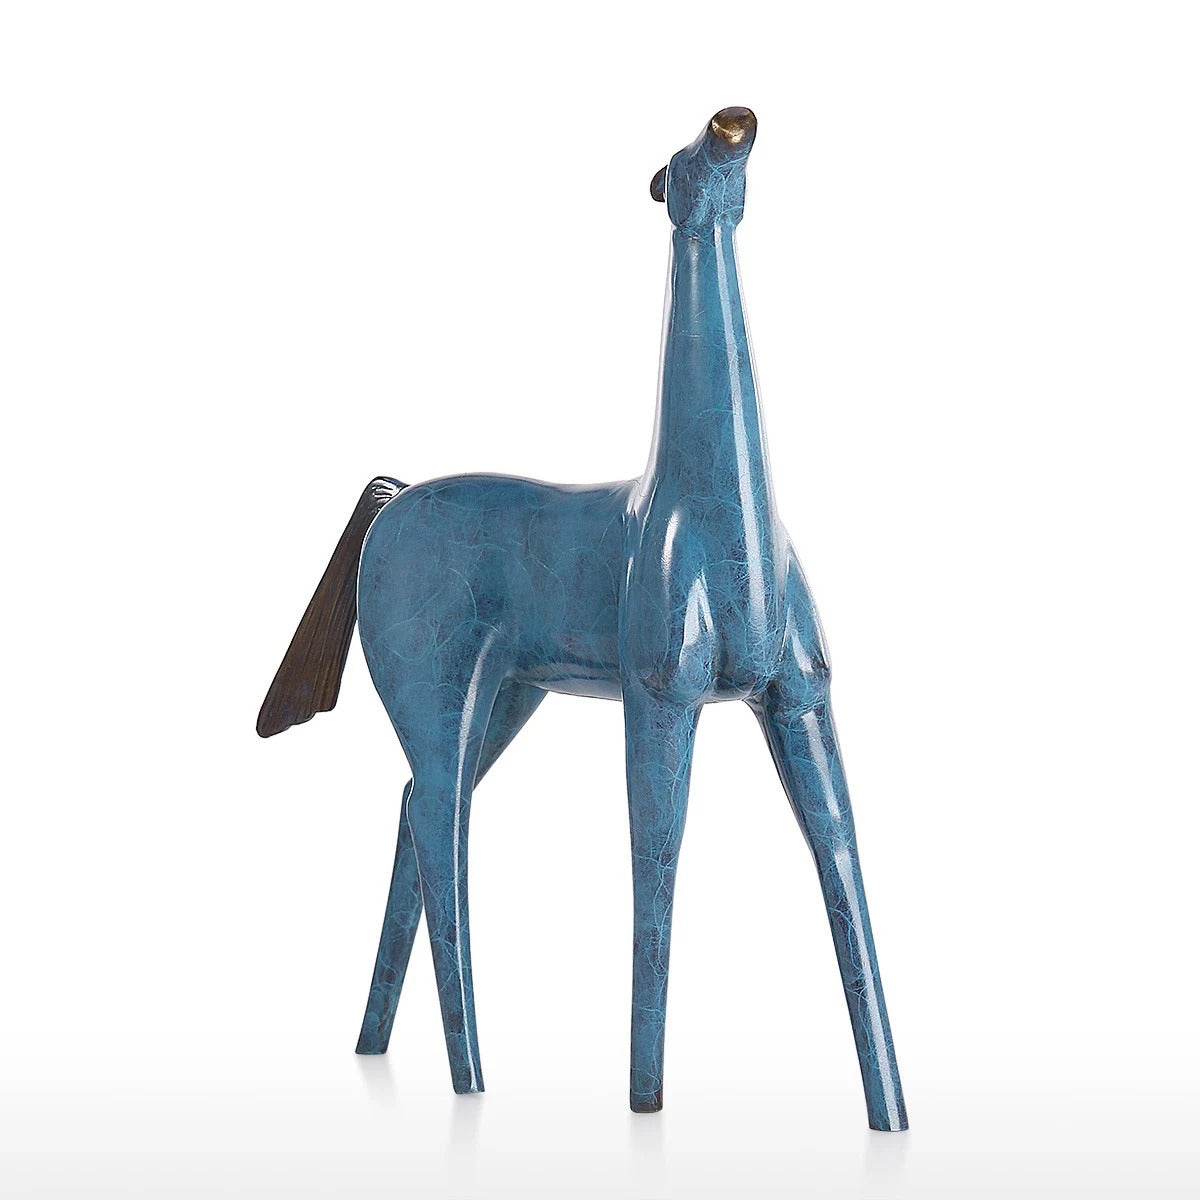 Bronze Horse Sculpture For Horse Decor and Horse Gifts